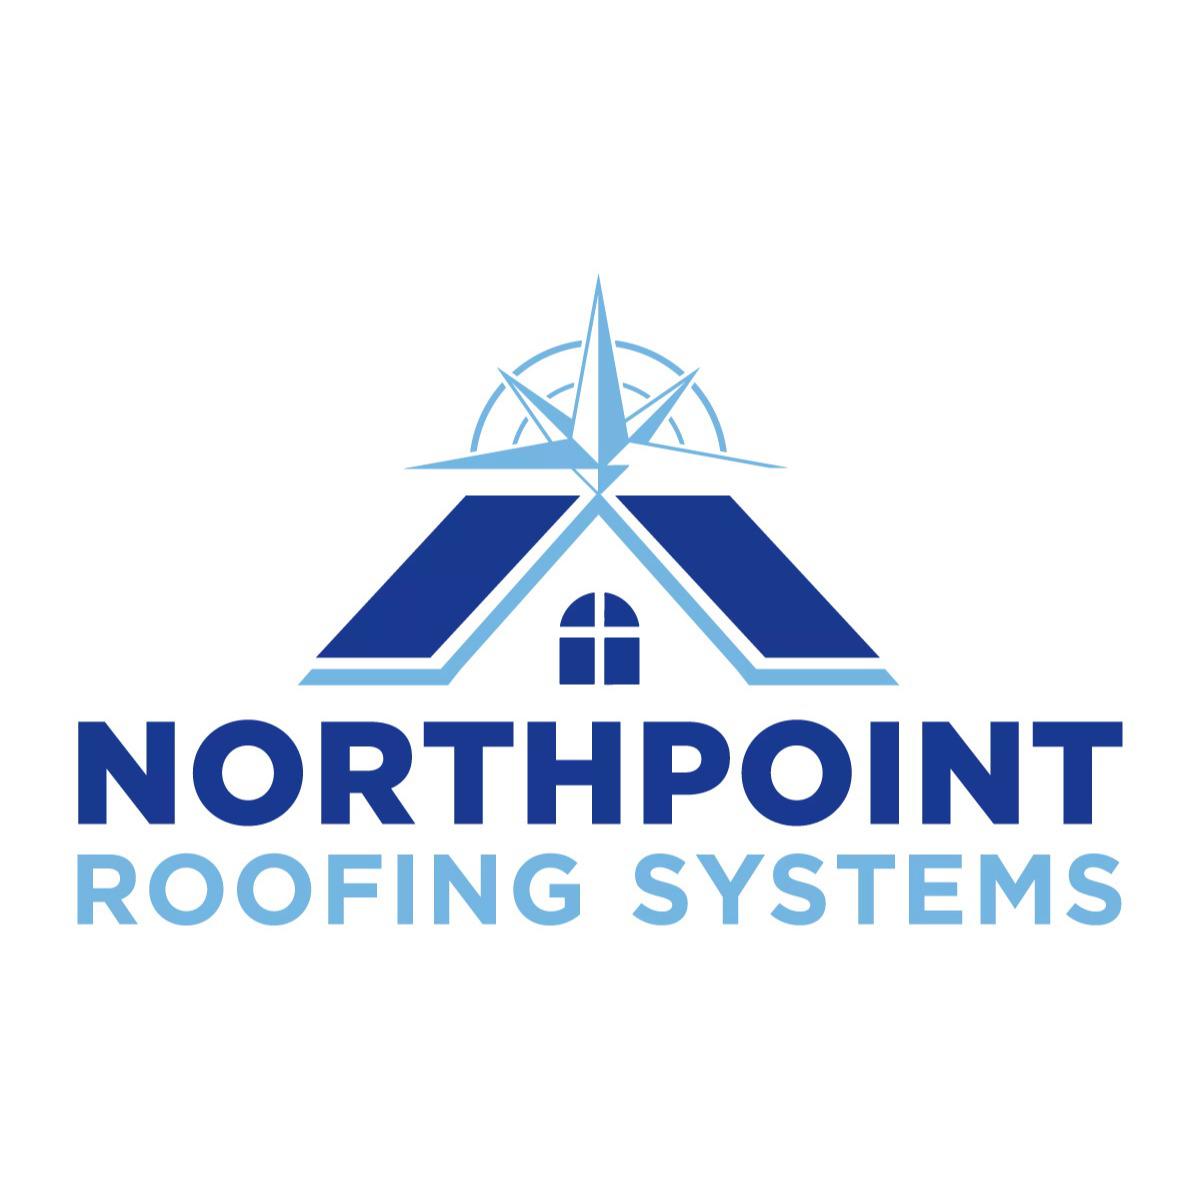 Northpoint Roofing Systems - Chattanooga, TN 37421 - (706)406-1604 | ShowMeLocal.com